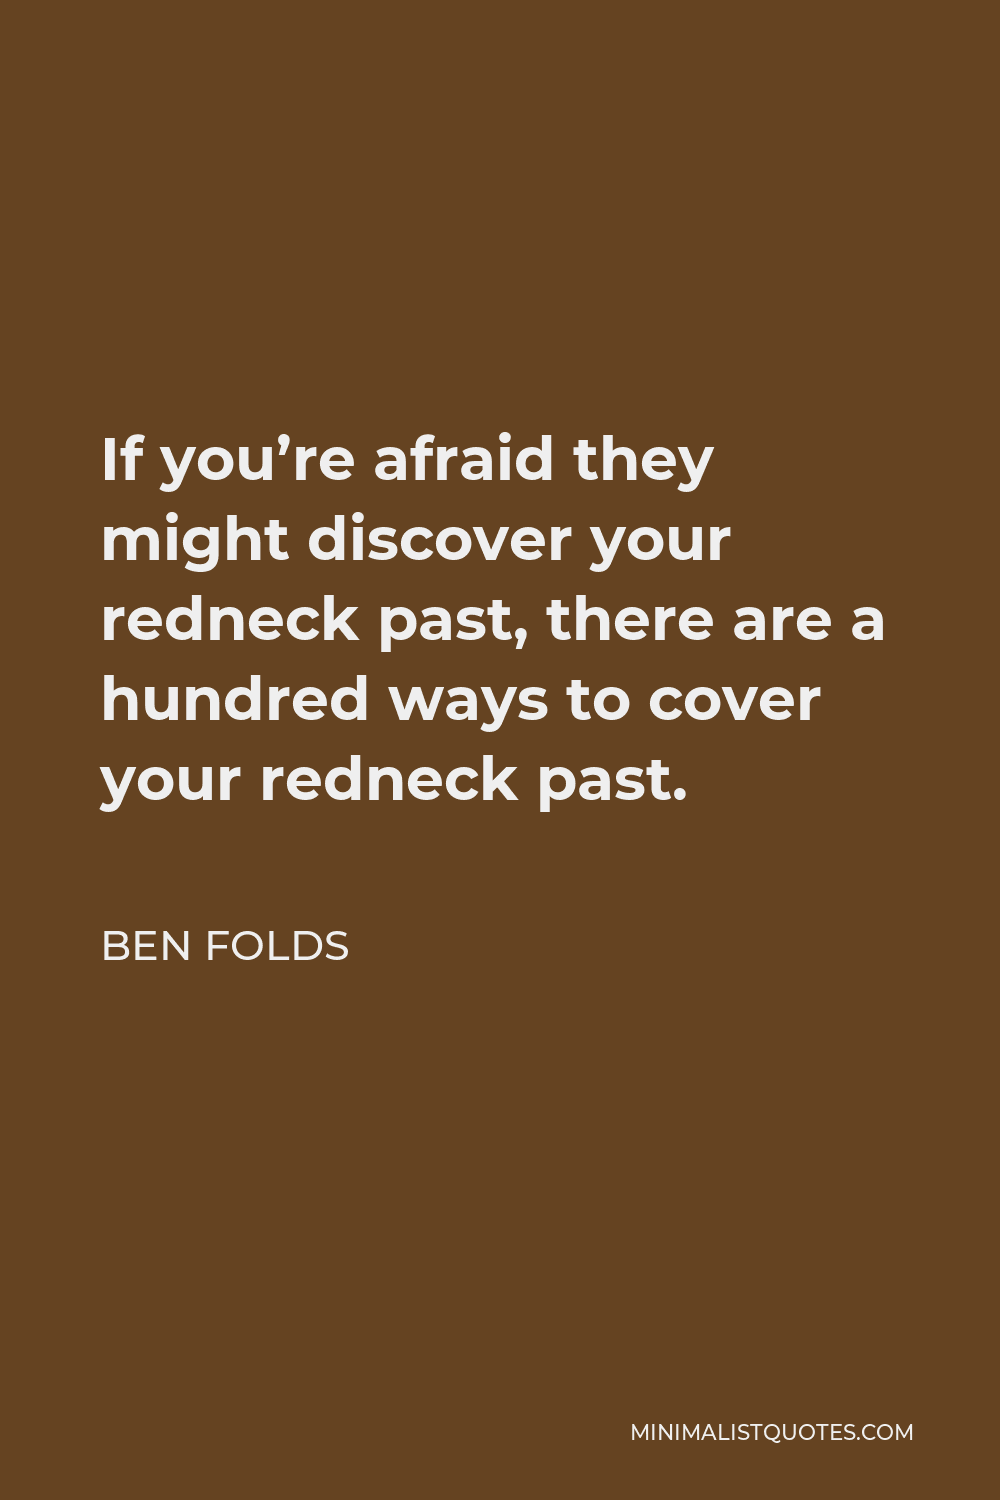 Ben Folds Quote - If you’re afraid they might discover your redneck past, there are a hundred ways to cover your redneck past.